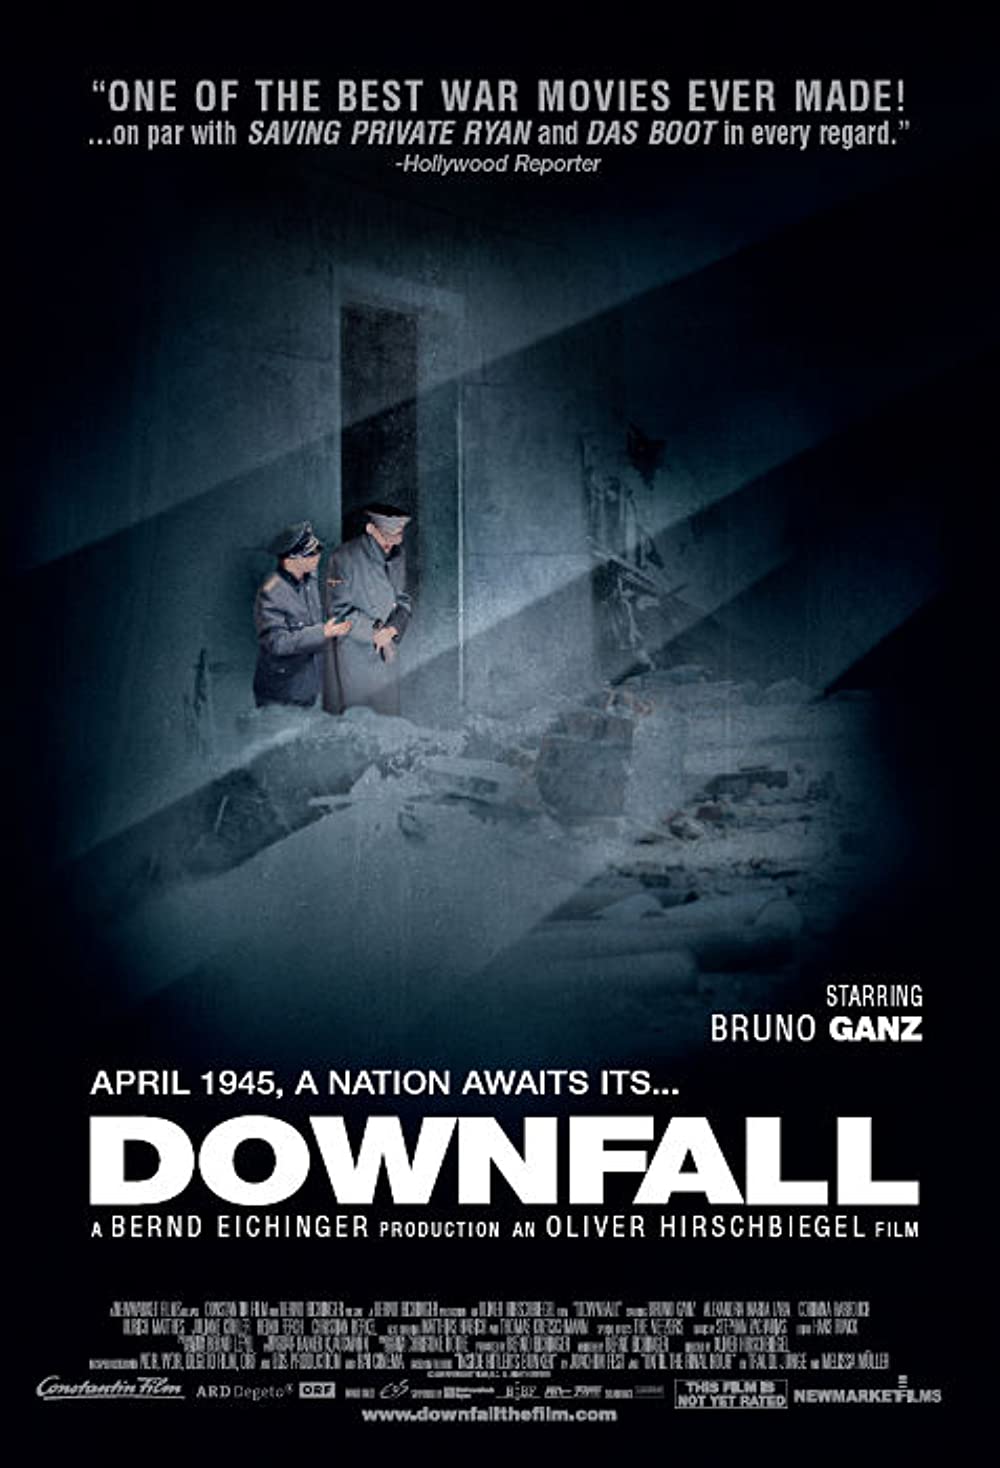 Downfall (2004) 14 Best Hitler Movies You Can't Miss